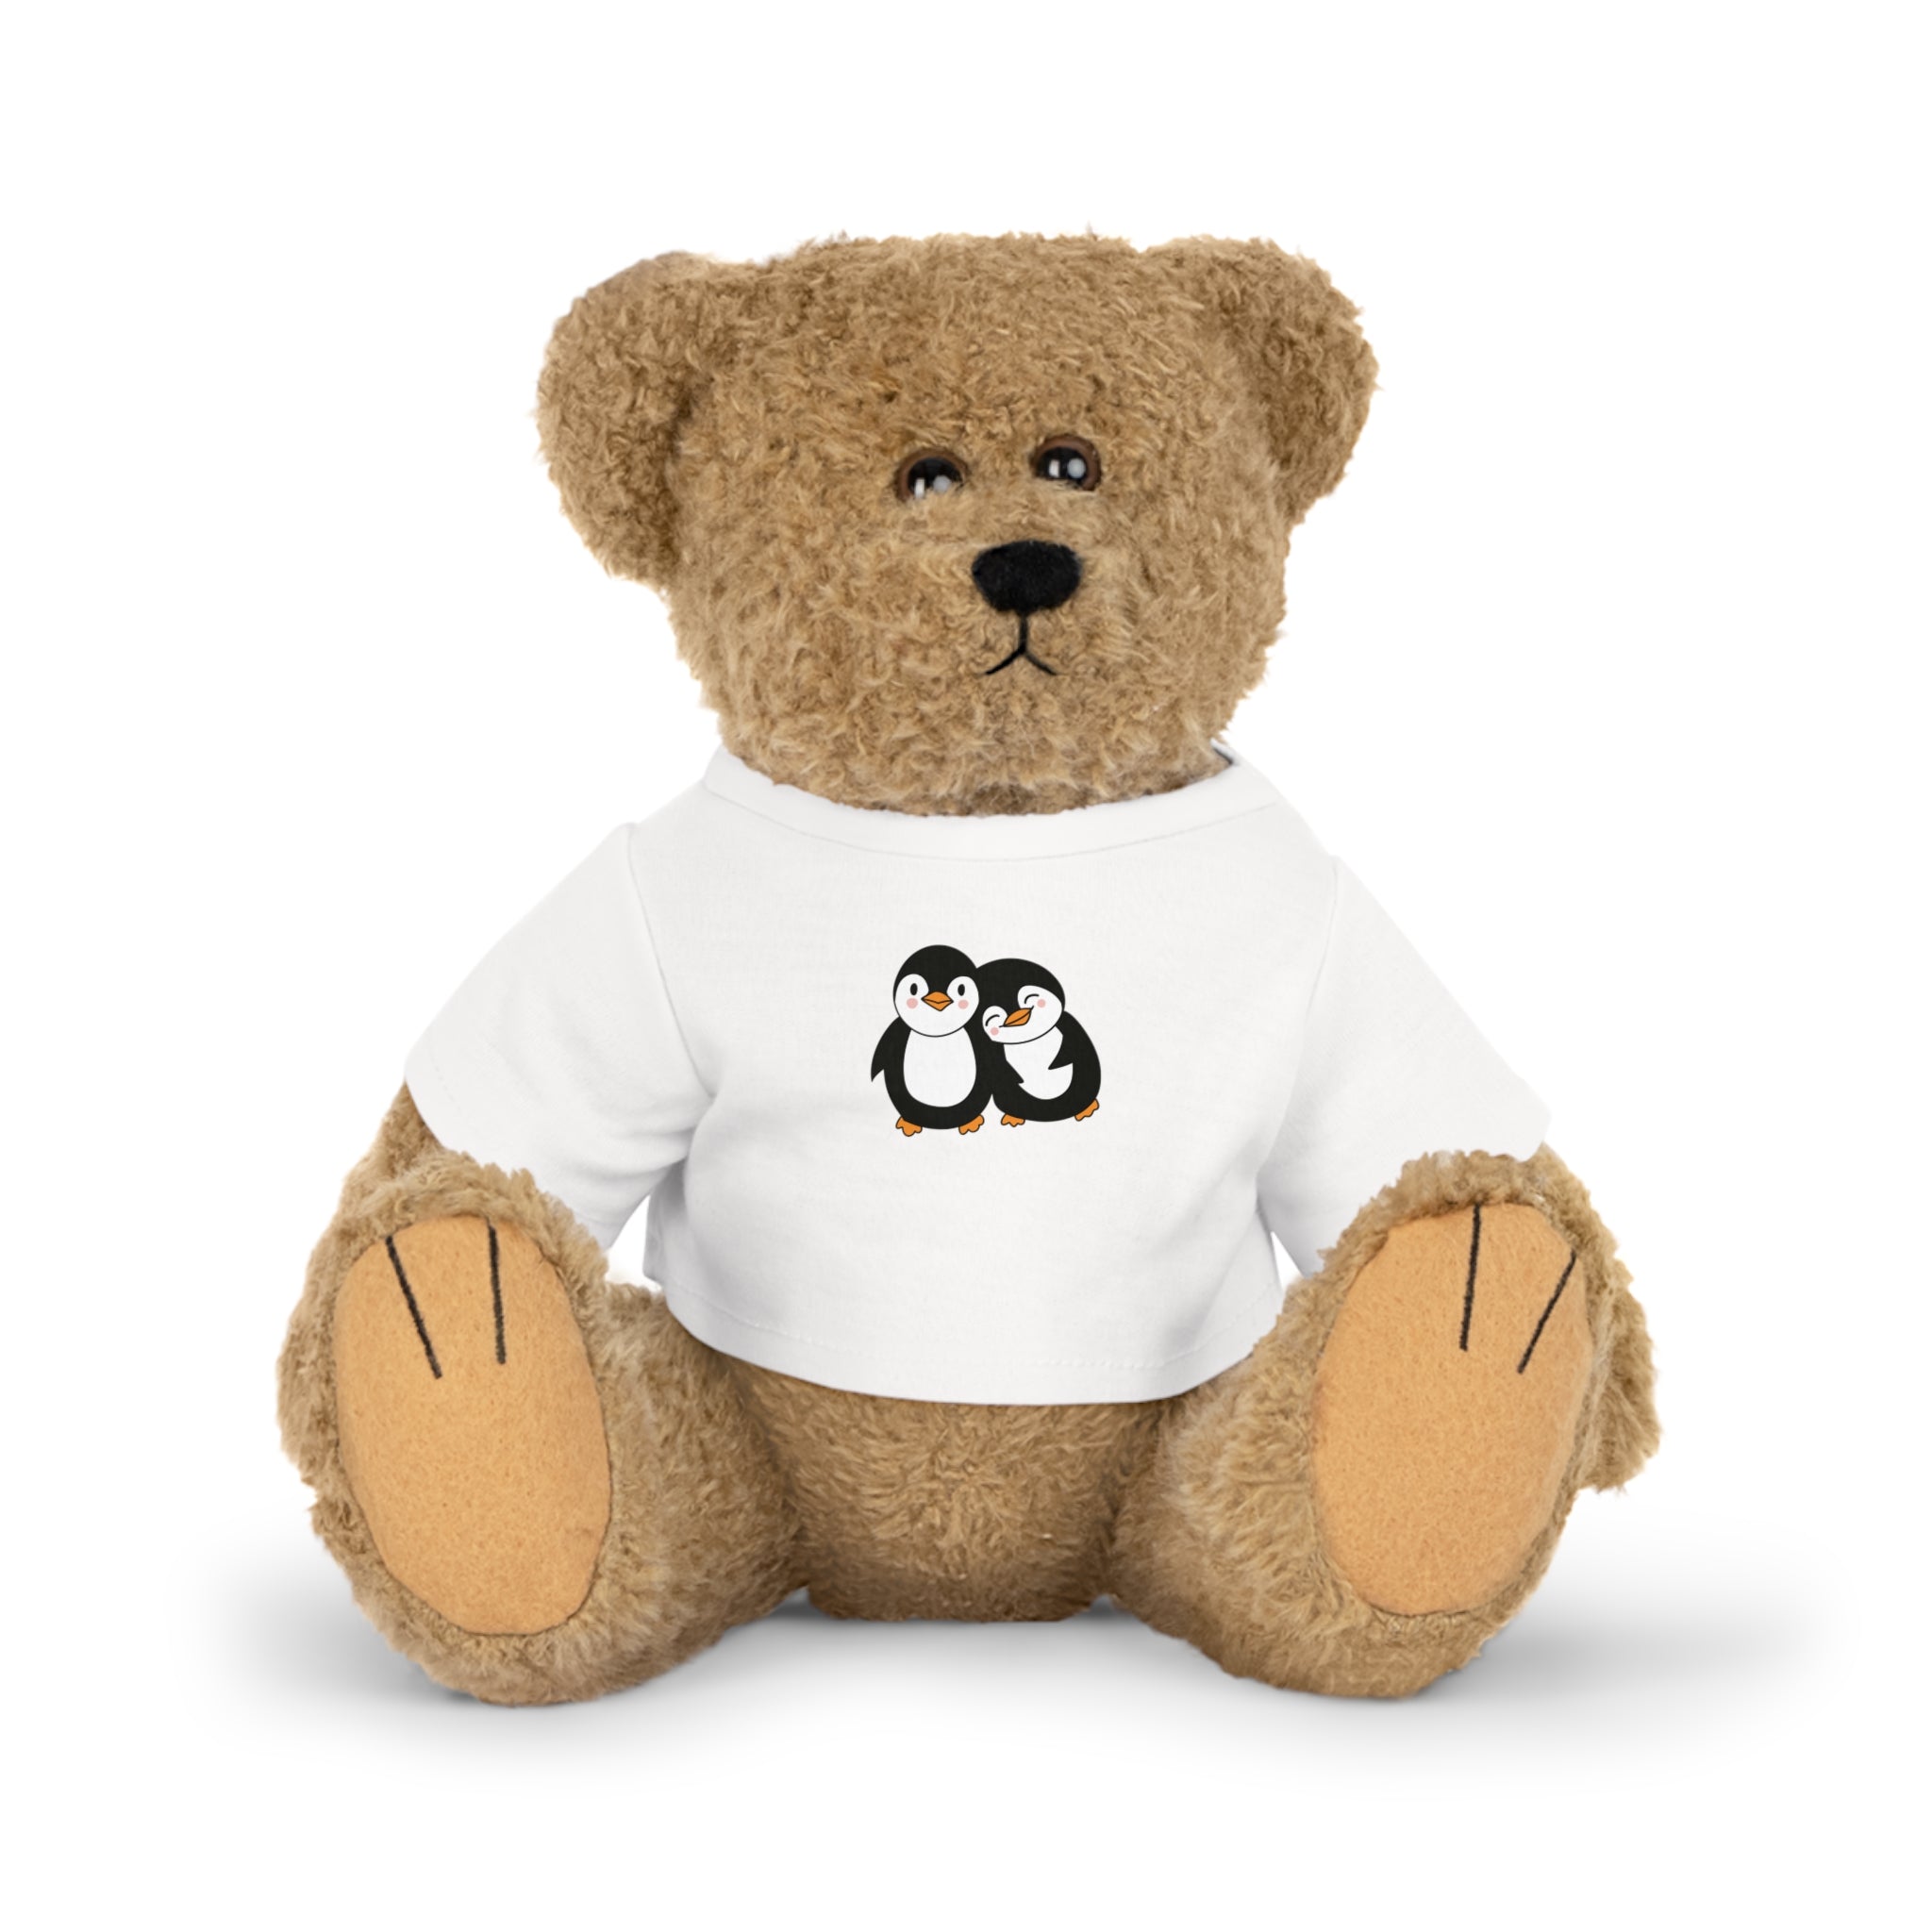 Best Friends Plush Toy with T-Shirt